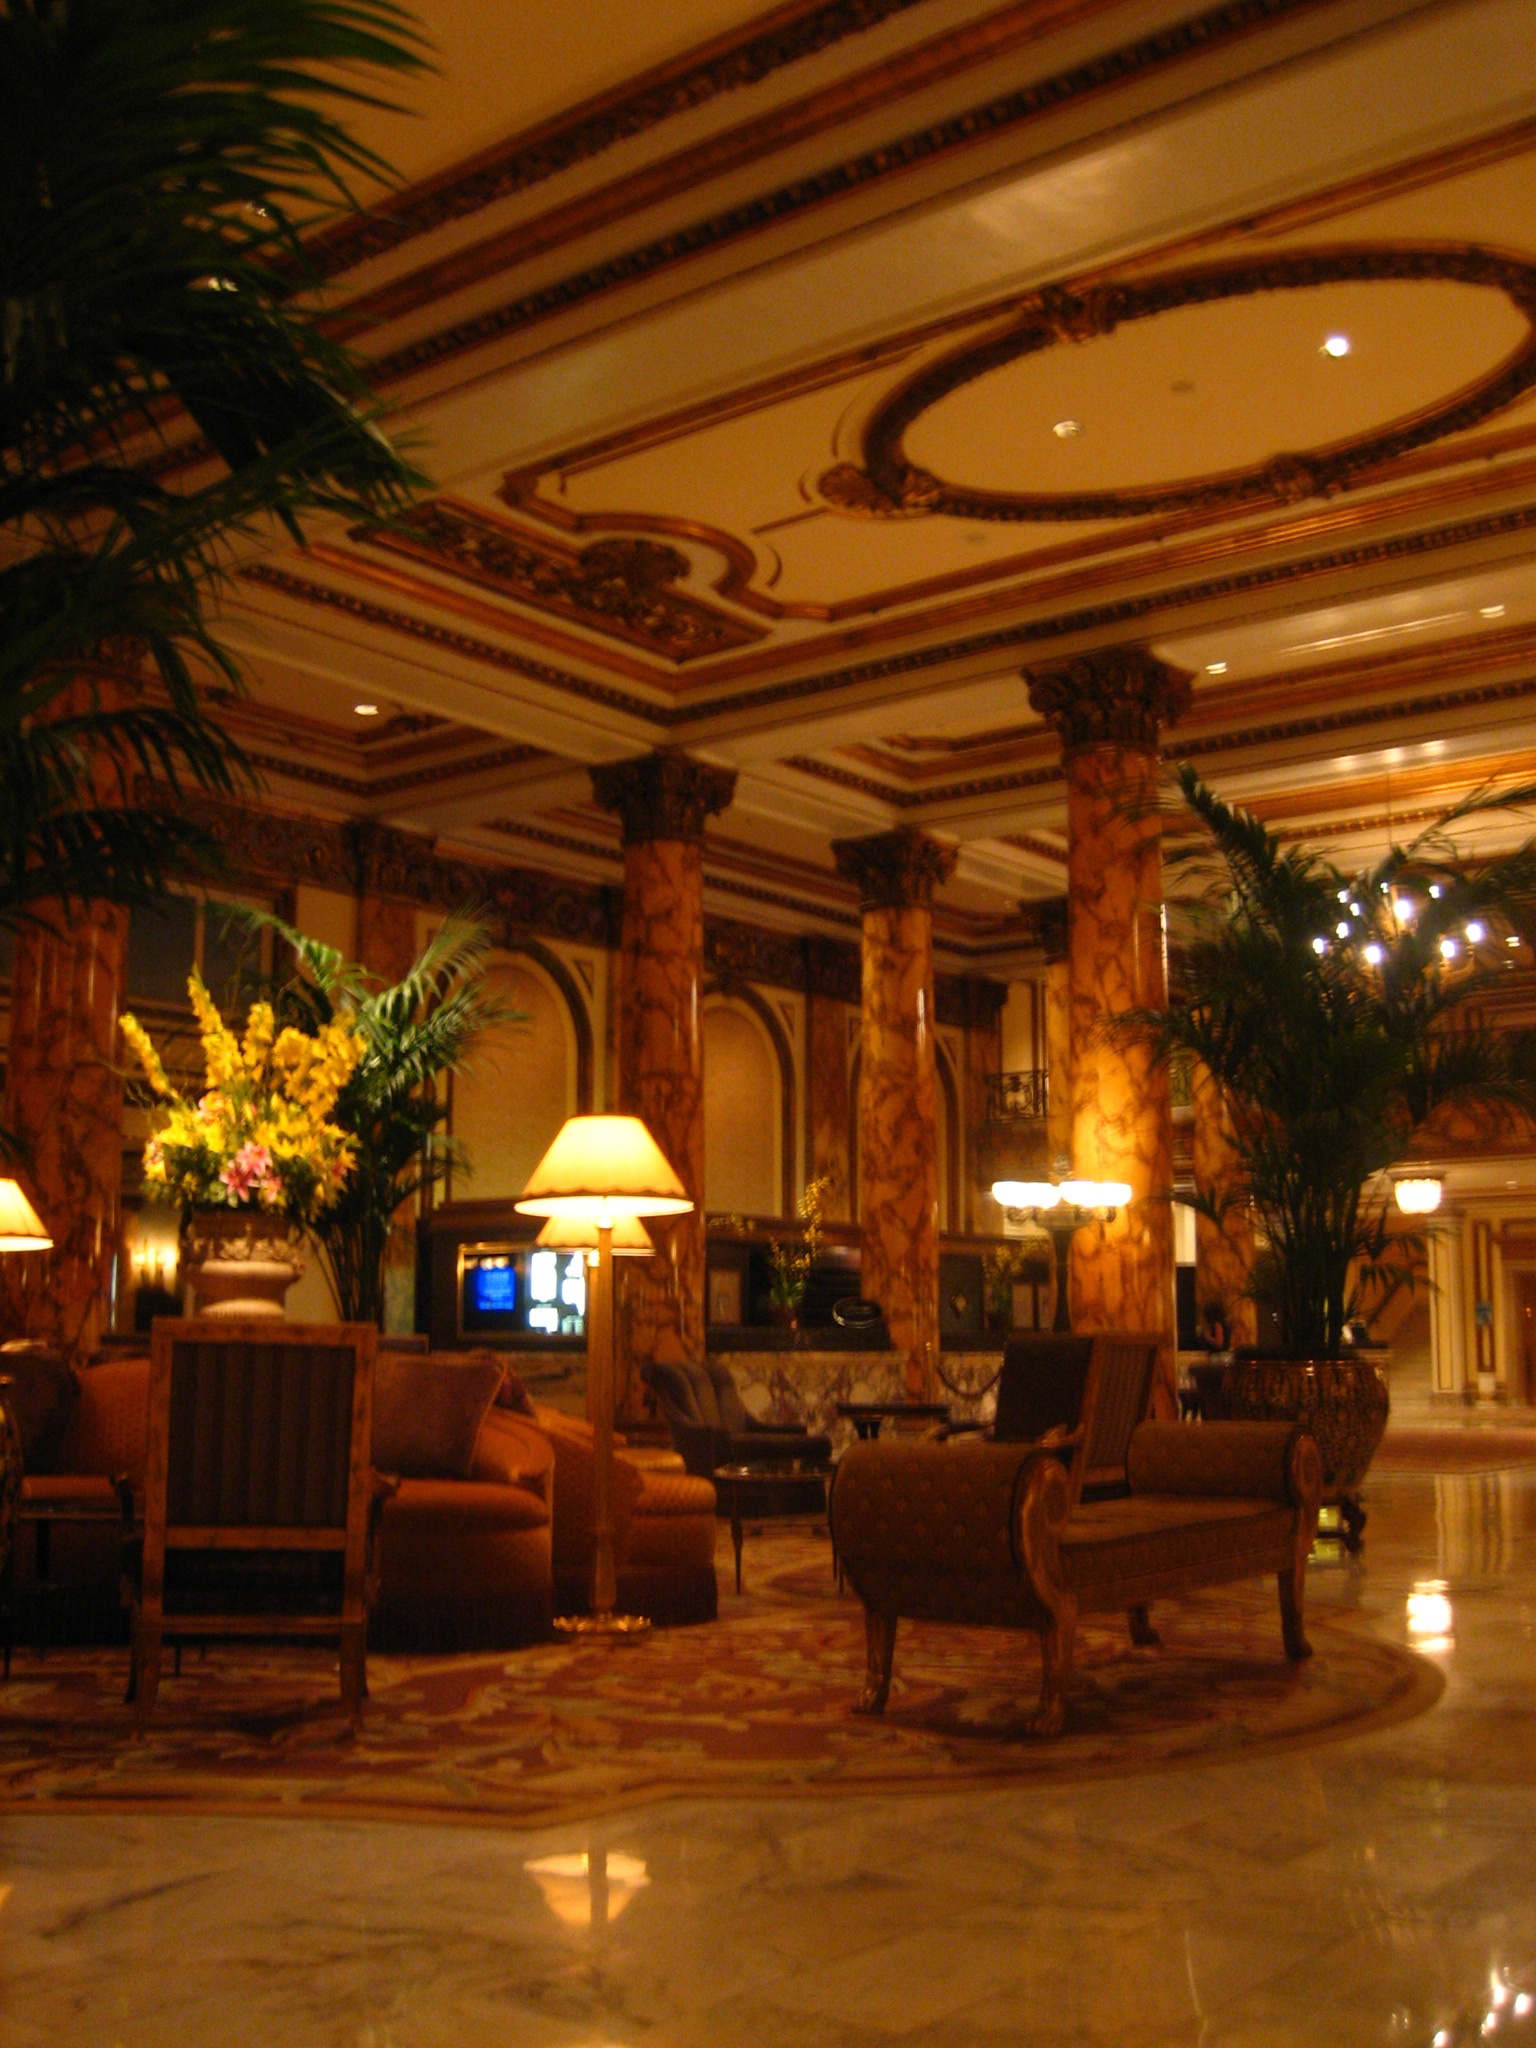 the large lobby has couches, chairs, and lamps